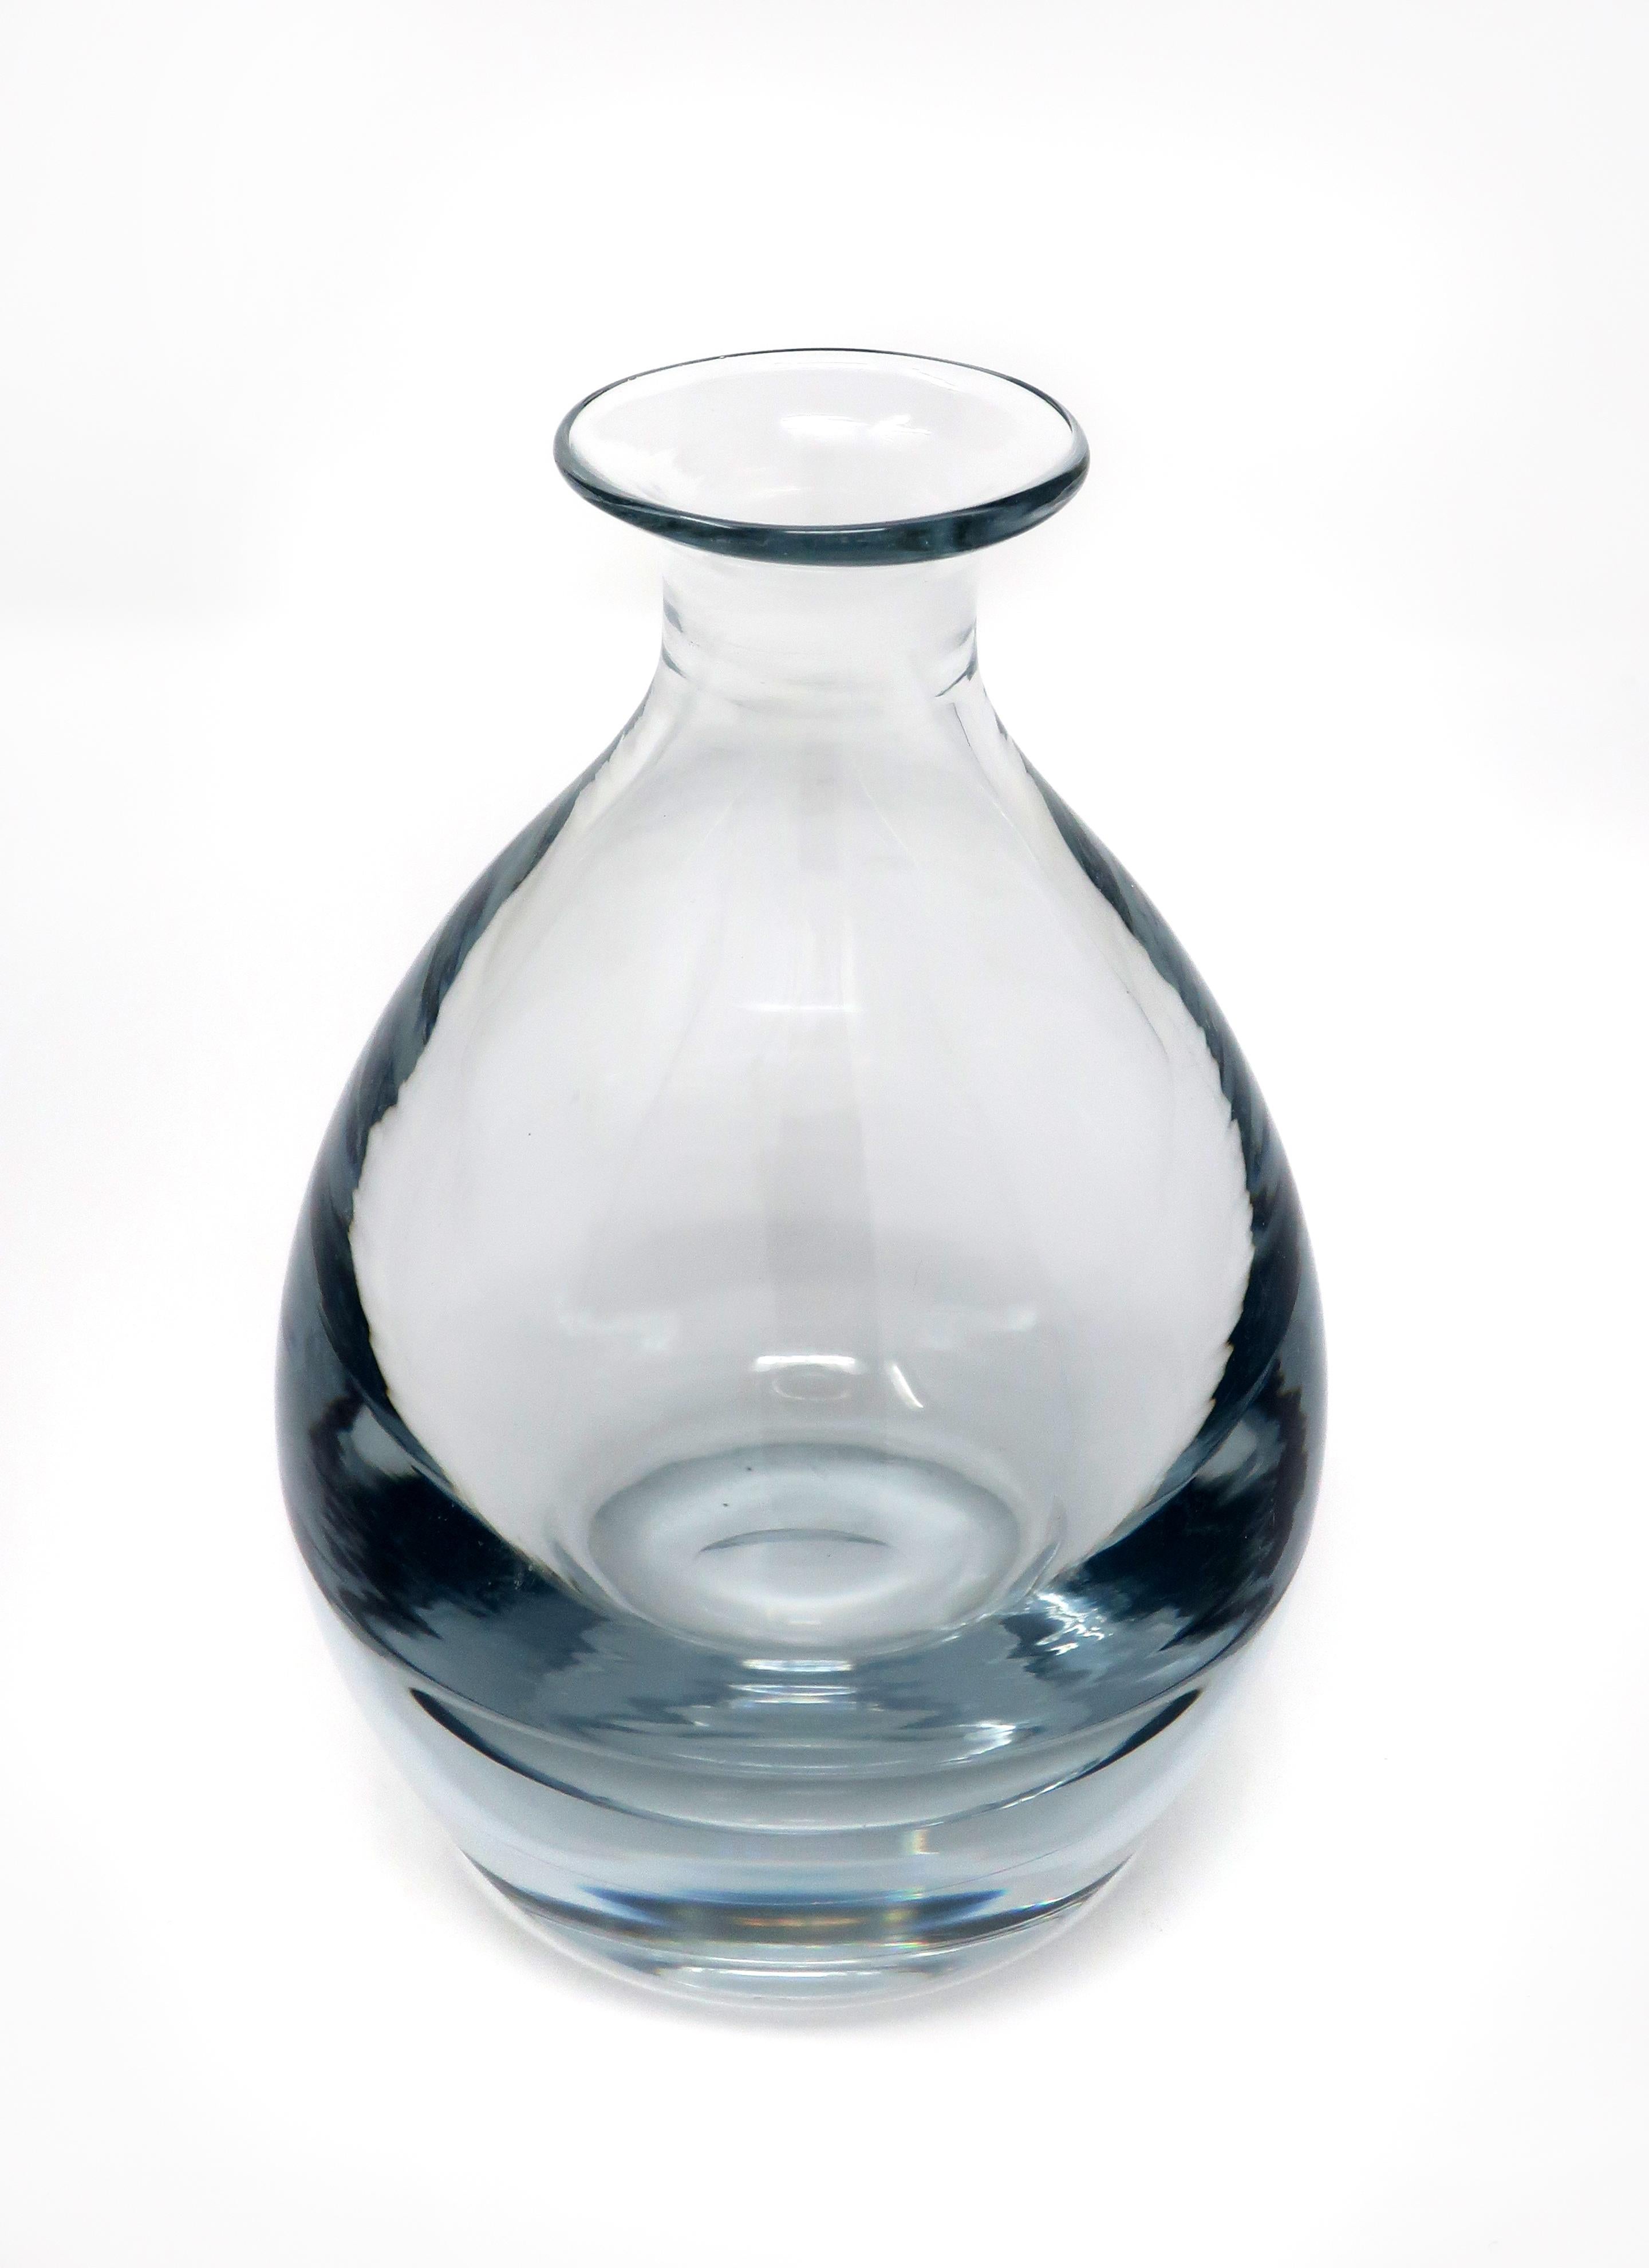 A stunning Scandinavian Modern Strombergshyttan glass vase with wide base, narrow neck, and flared opening. Signed on underside “Stromberg 024”. In excellent vintage condition.

Measures: 4